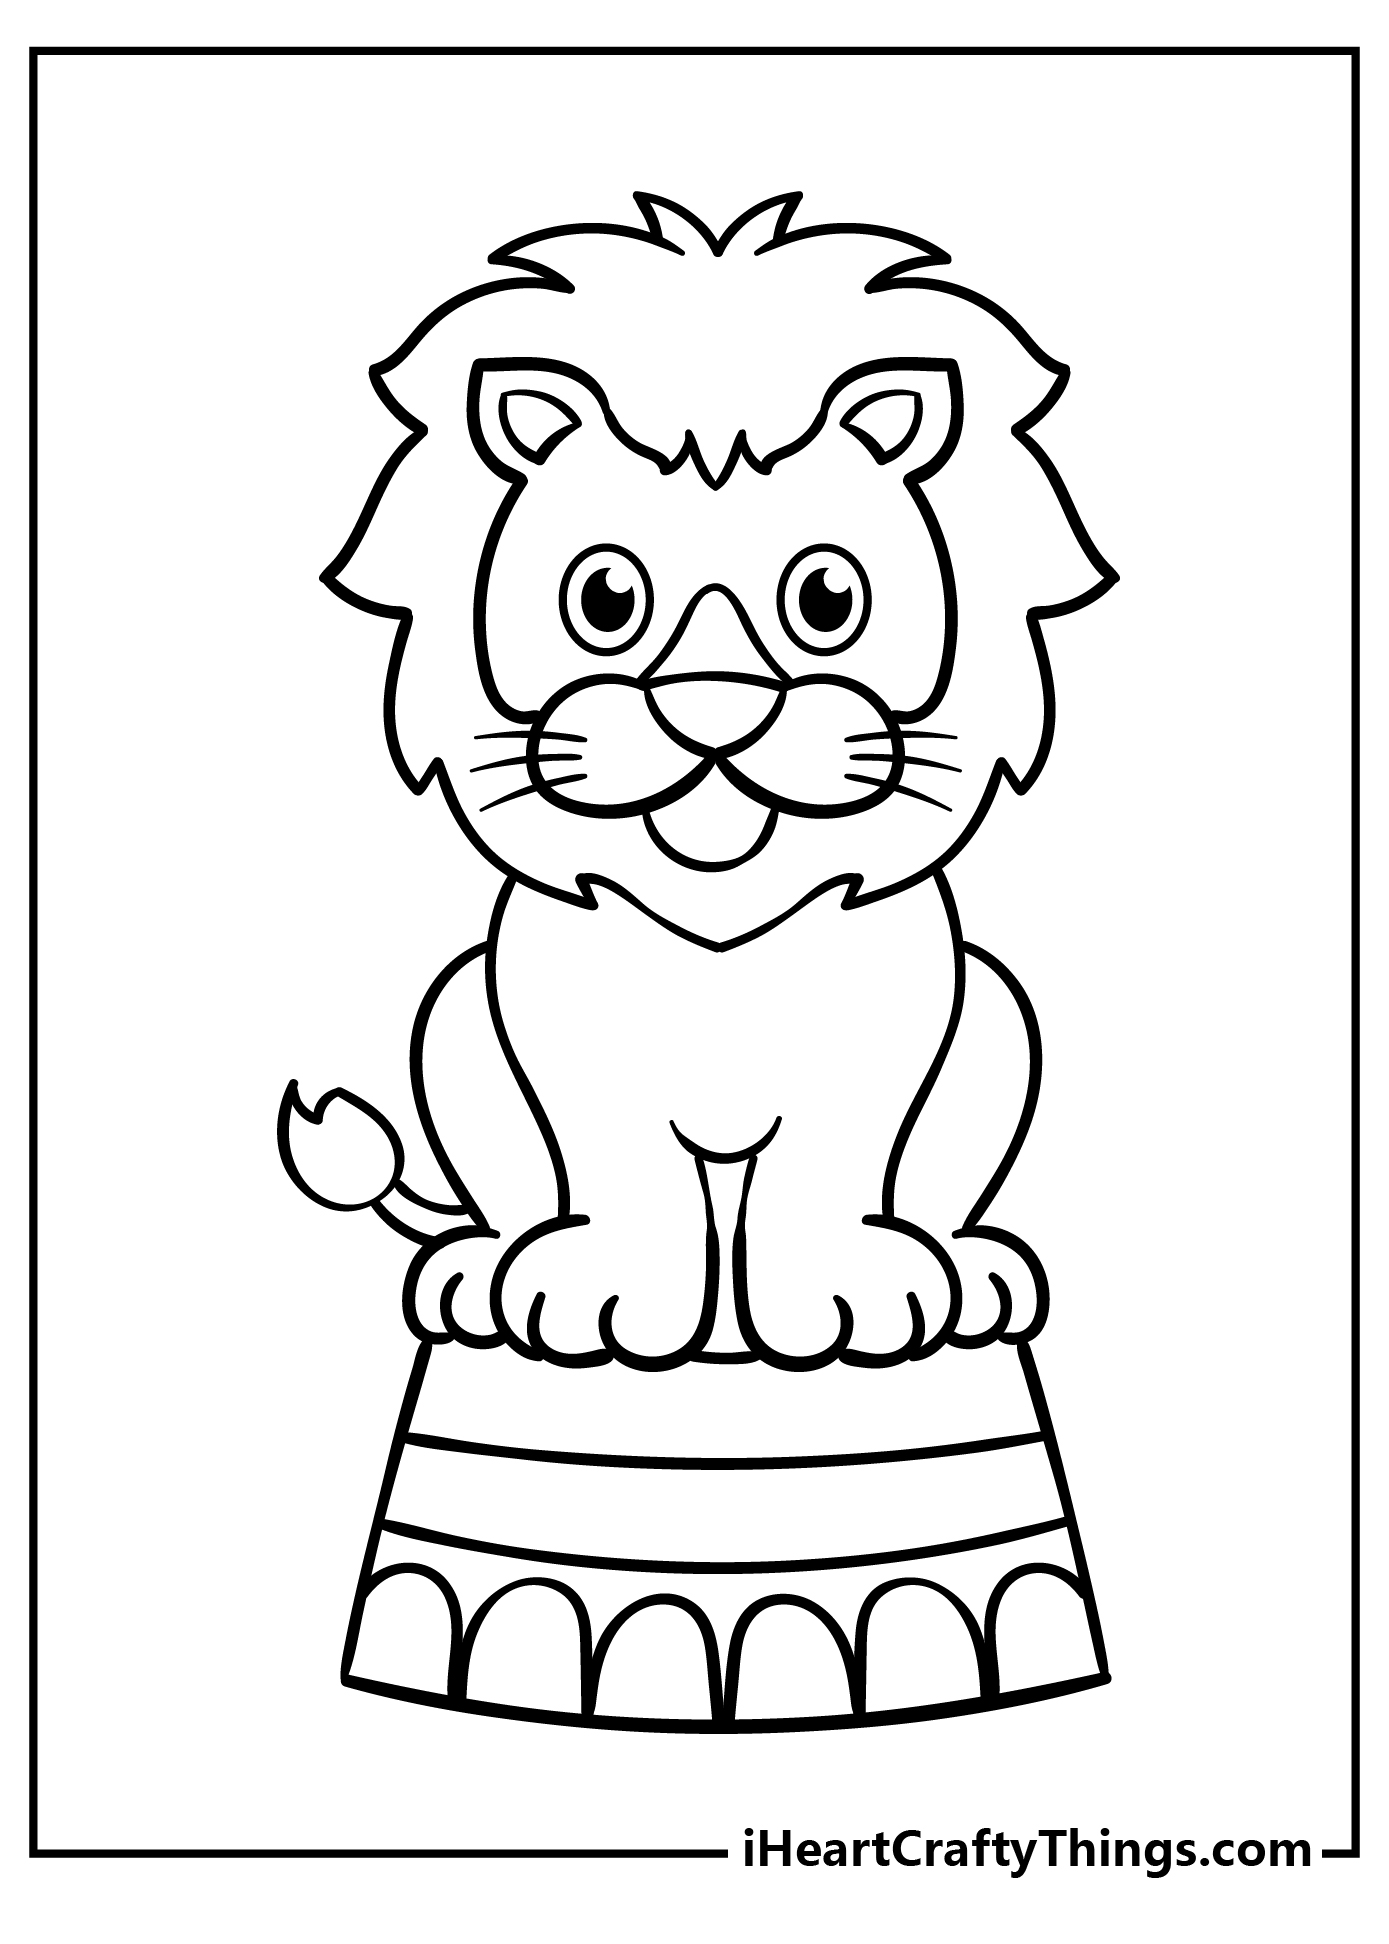 Circus coloring pages free printables